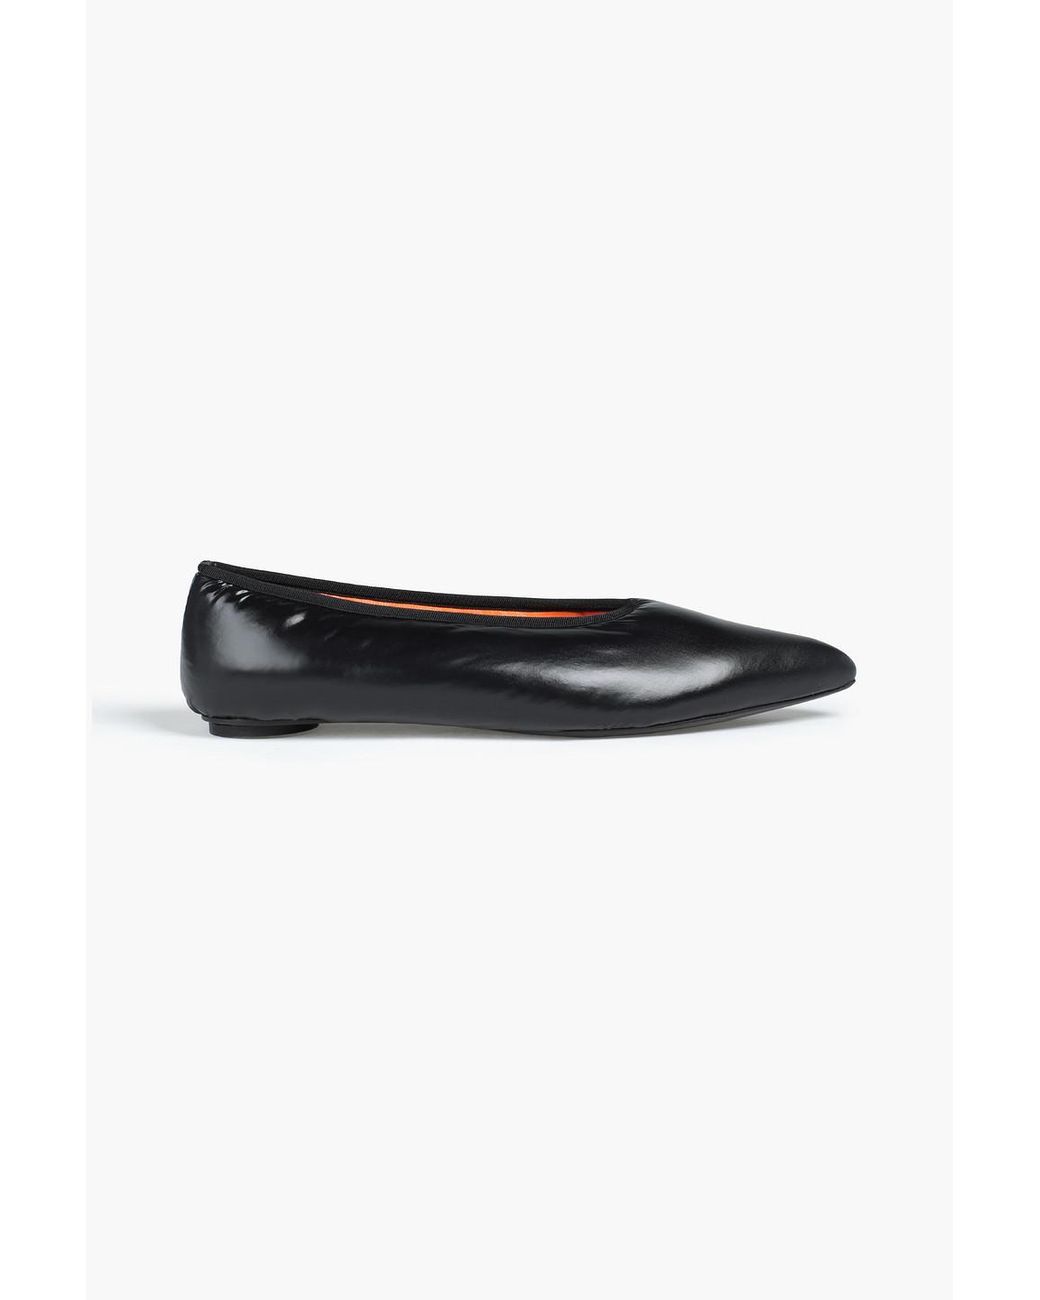 Marni Leather Shell Point-toe Flats in Black | Lyst